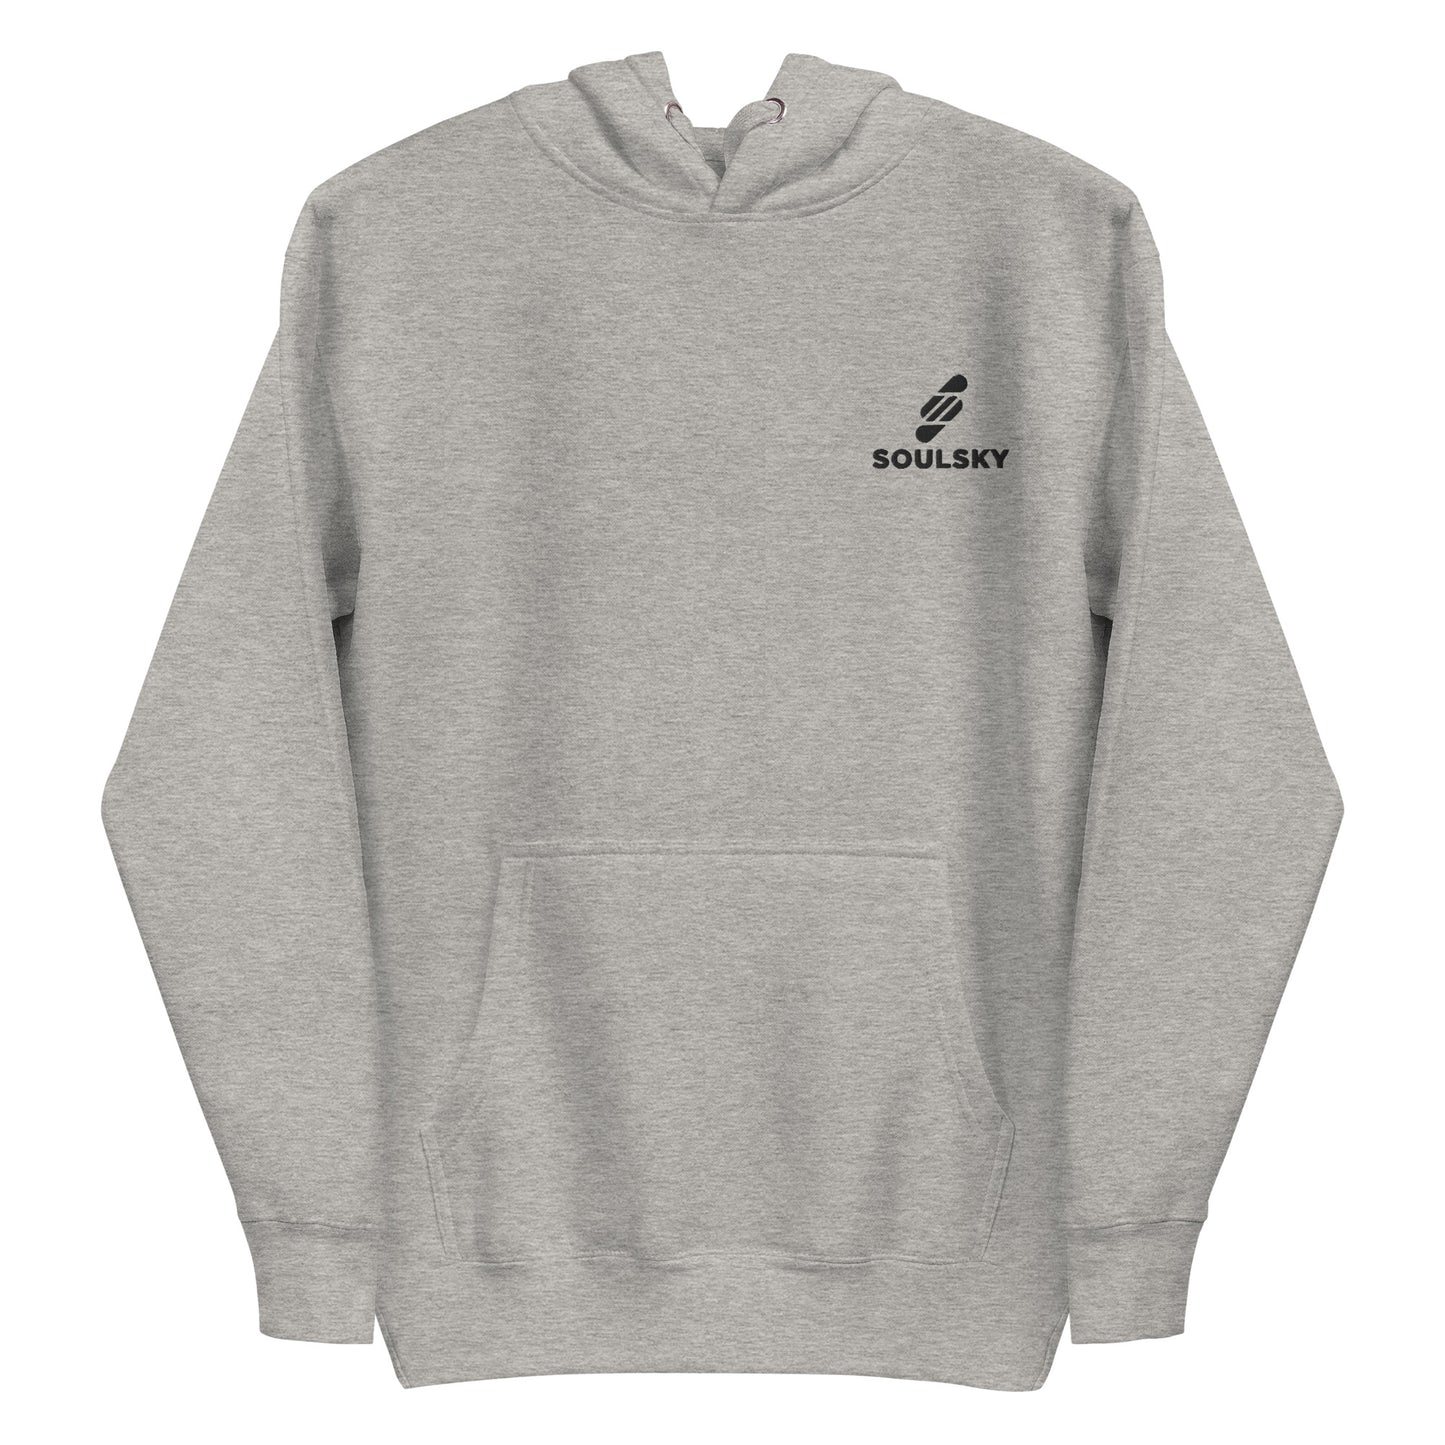 Light gray hoodie with black embroidered logo on the upper left side that says 'SOULSKY'. Pic 2.